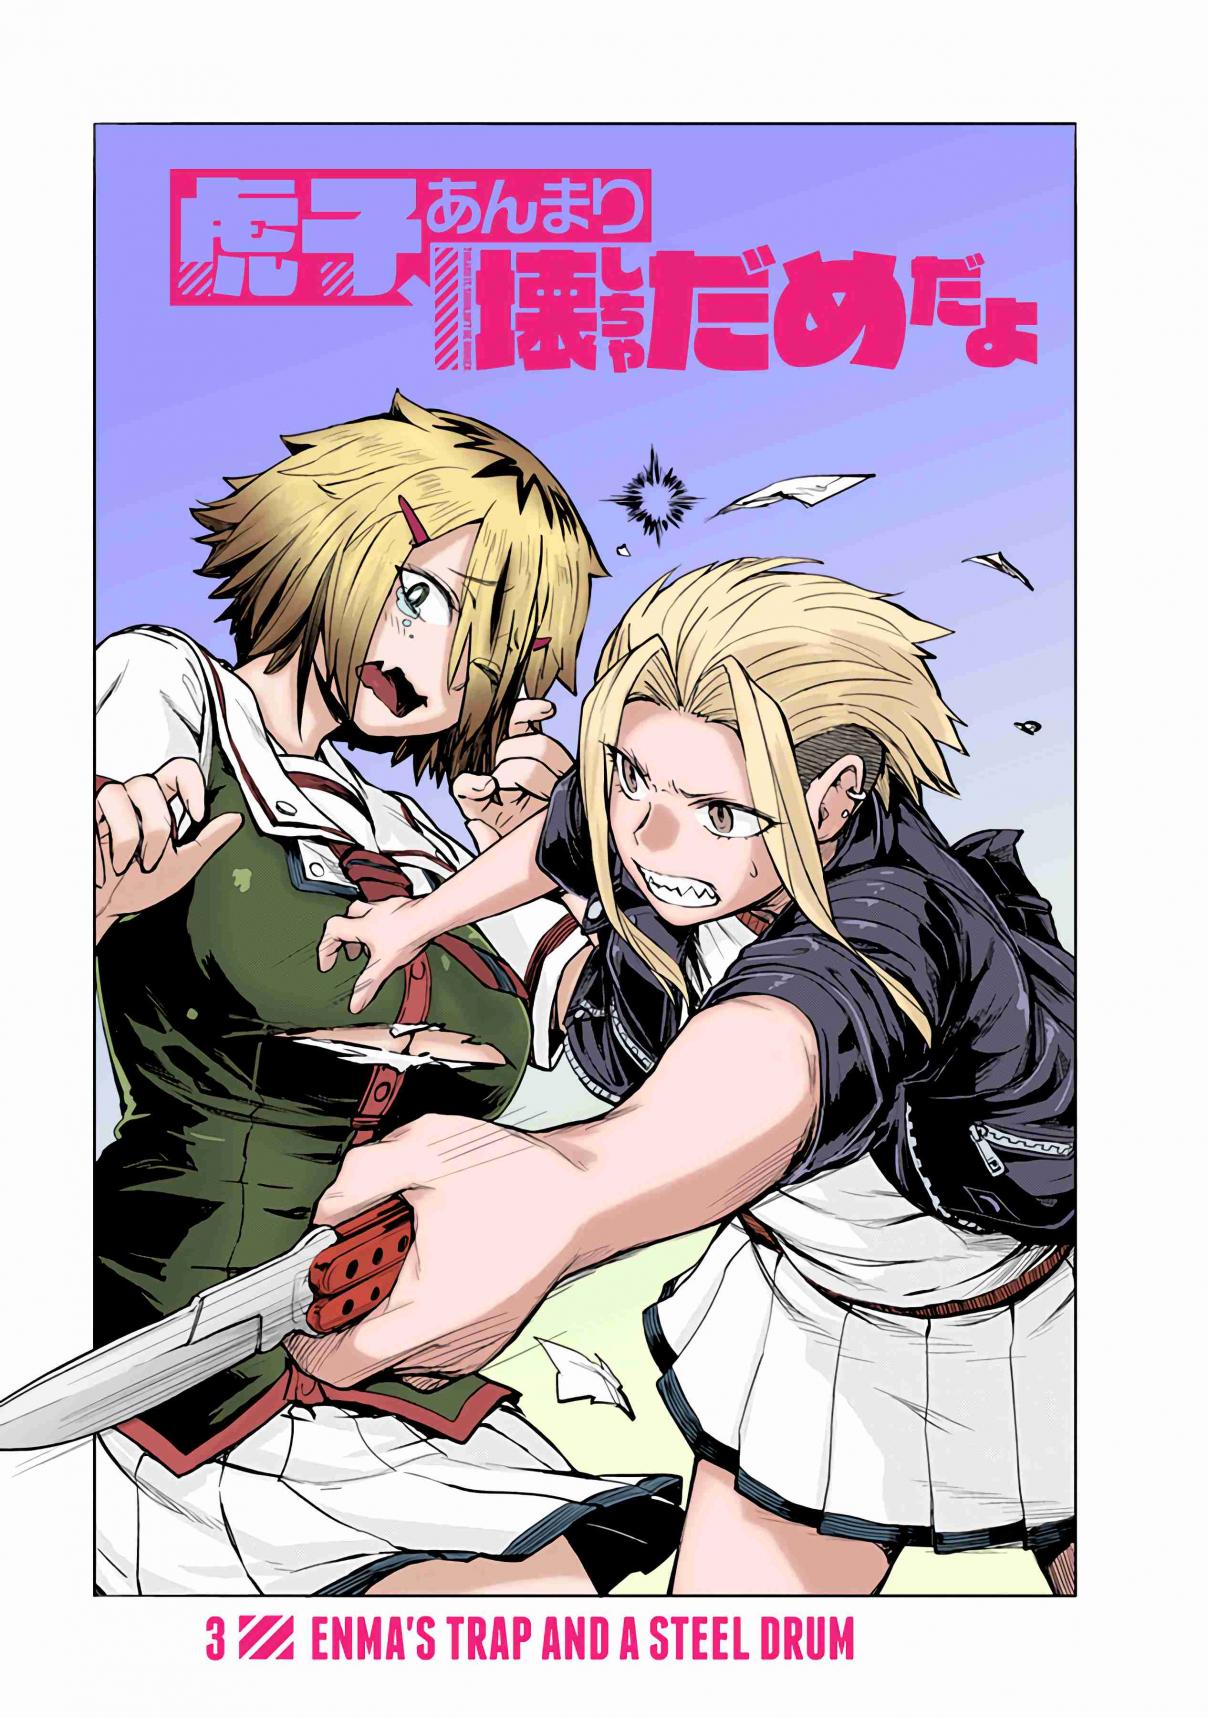 Torako! Don't Break Everything! (Fan Colored) Vol. 1 Ch. 3 Enma's Trap and A Steel Drum